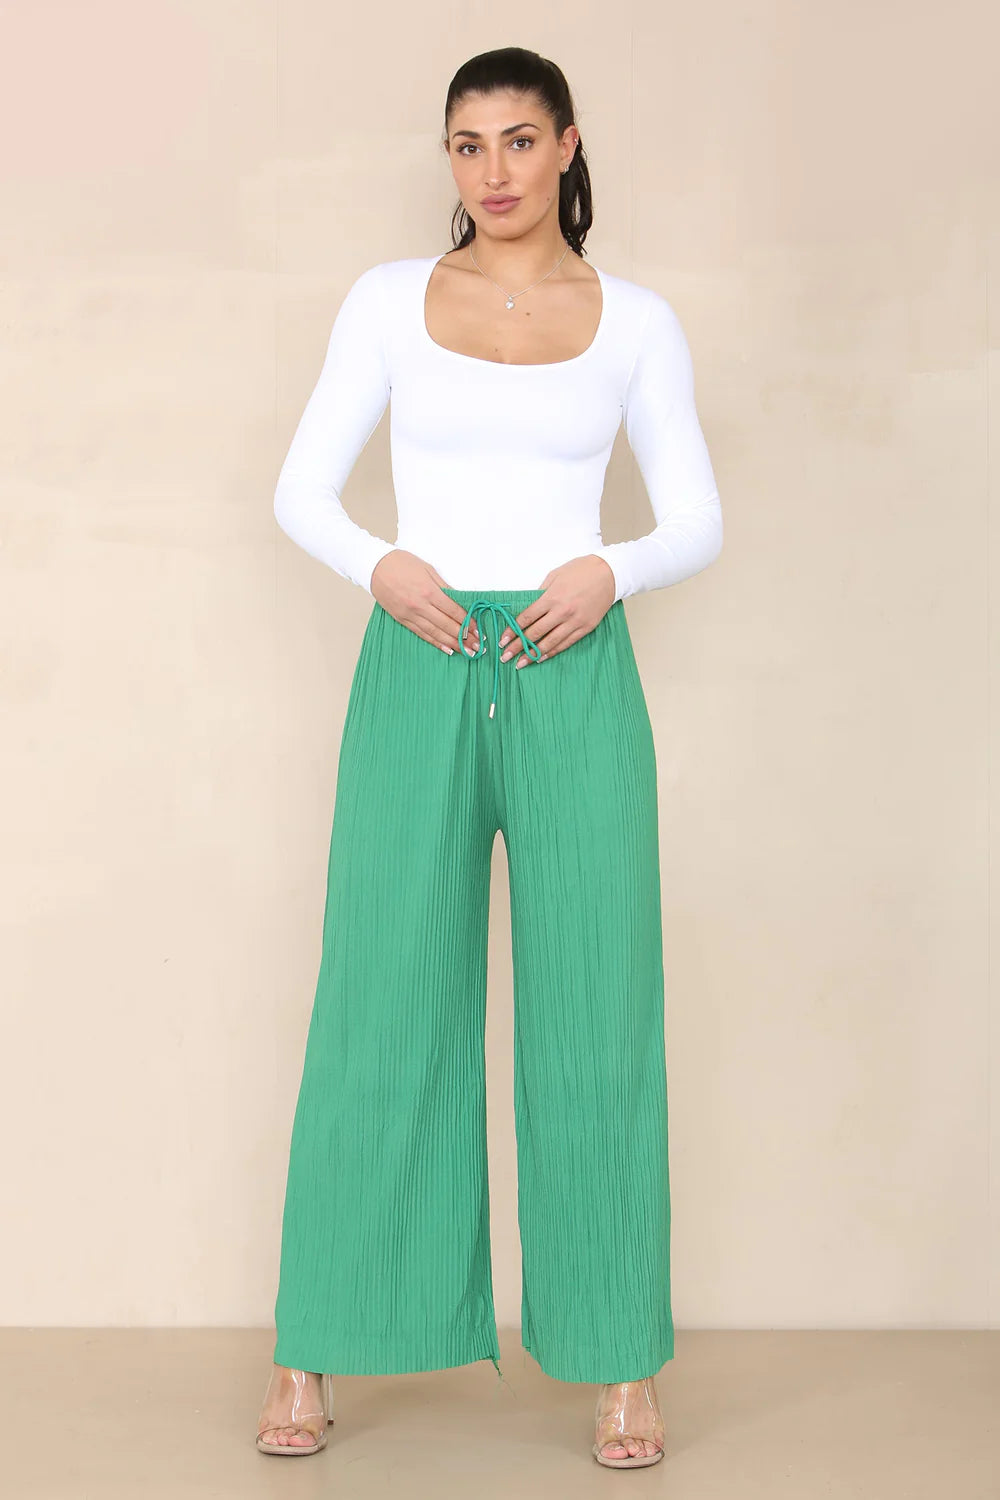 Hallie Plain Pleated Women's Trousers UK: Seagreen, Stylish Comfort, Crowd Standout